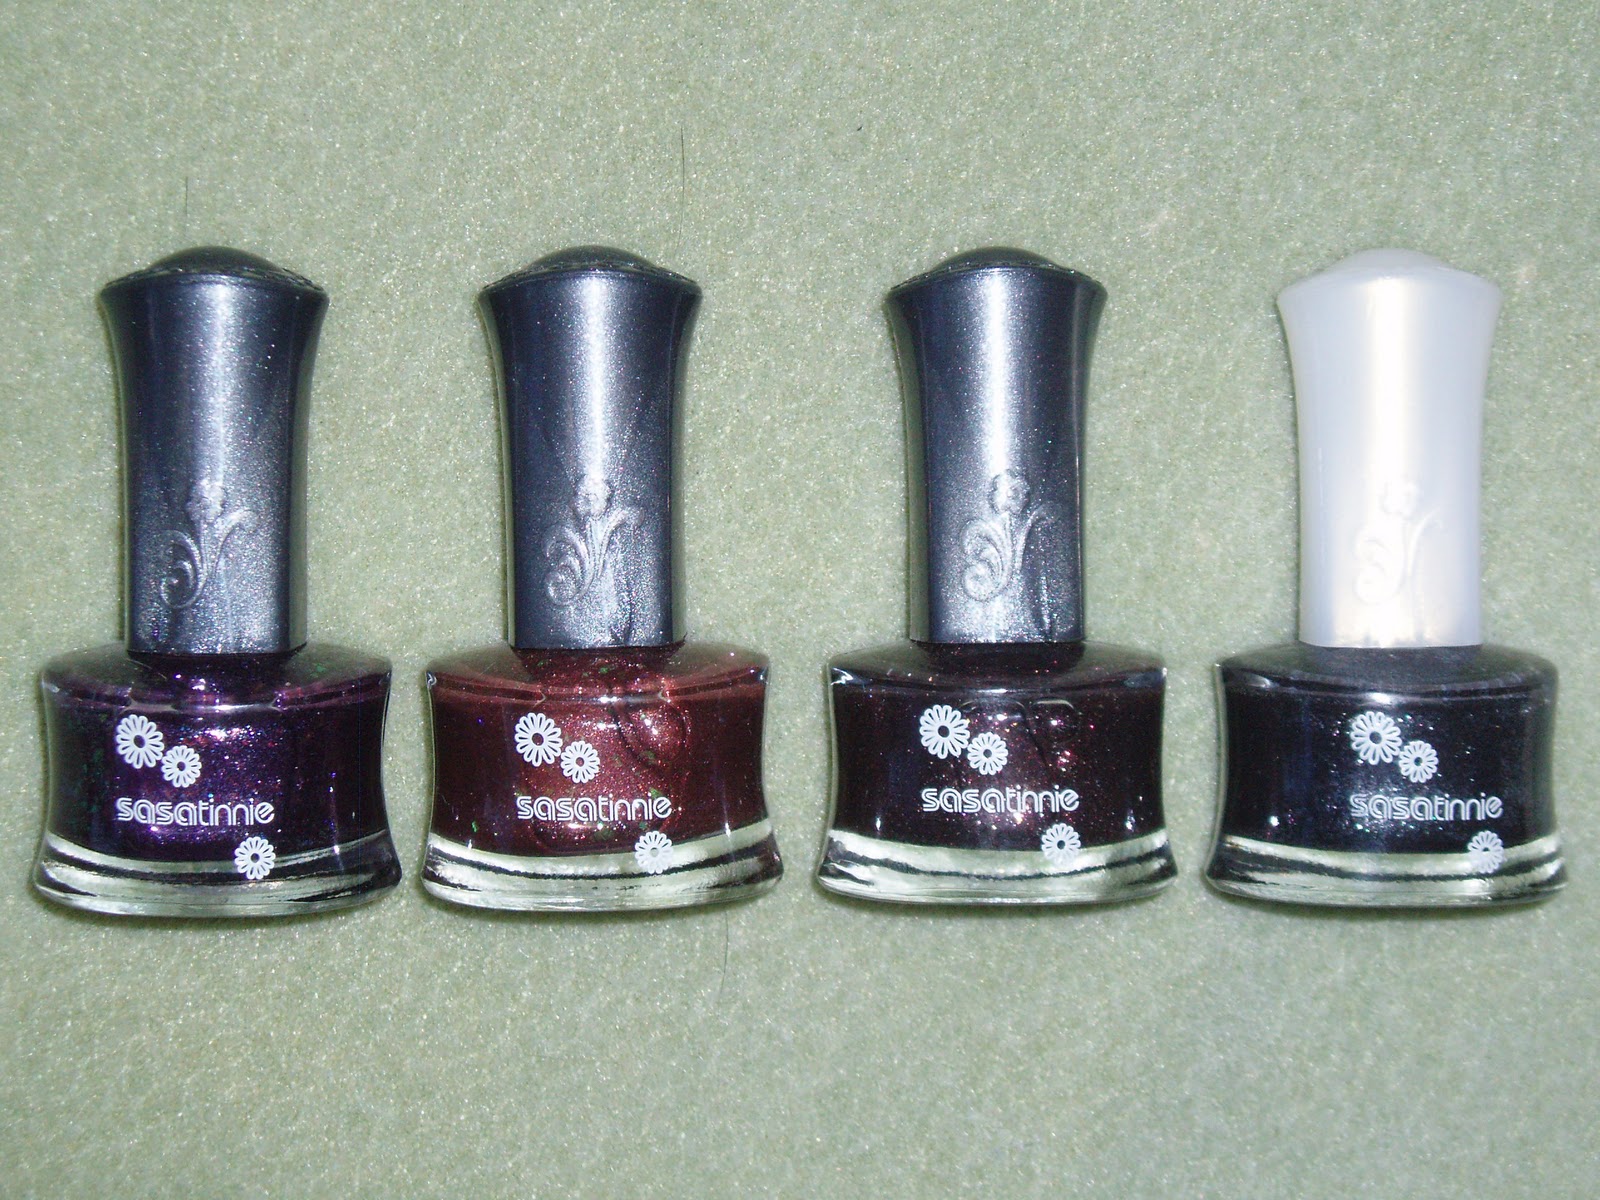 couldn't be happier to finally get my hands on Asian nail polish brands